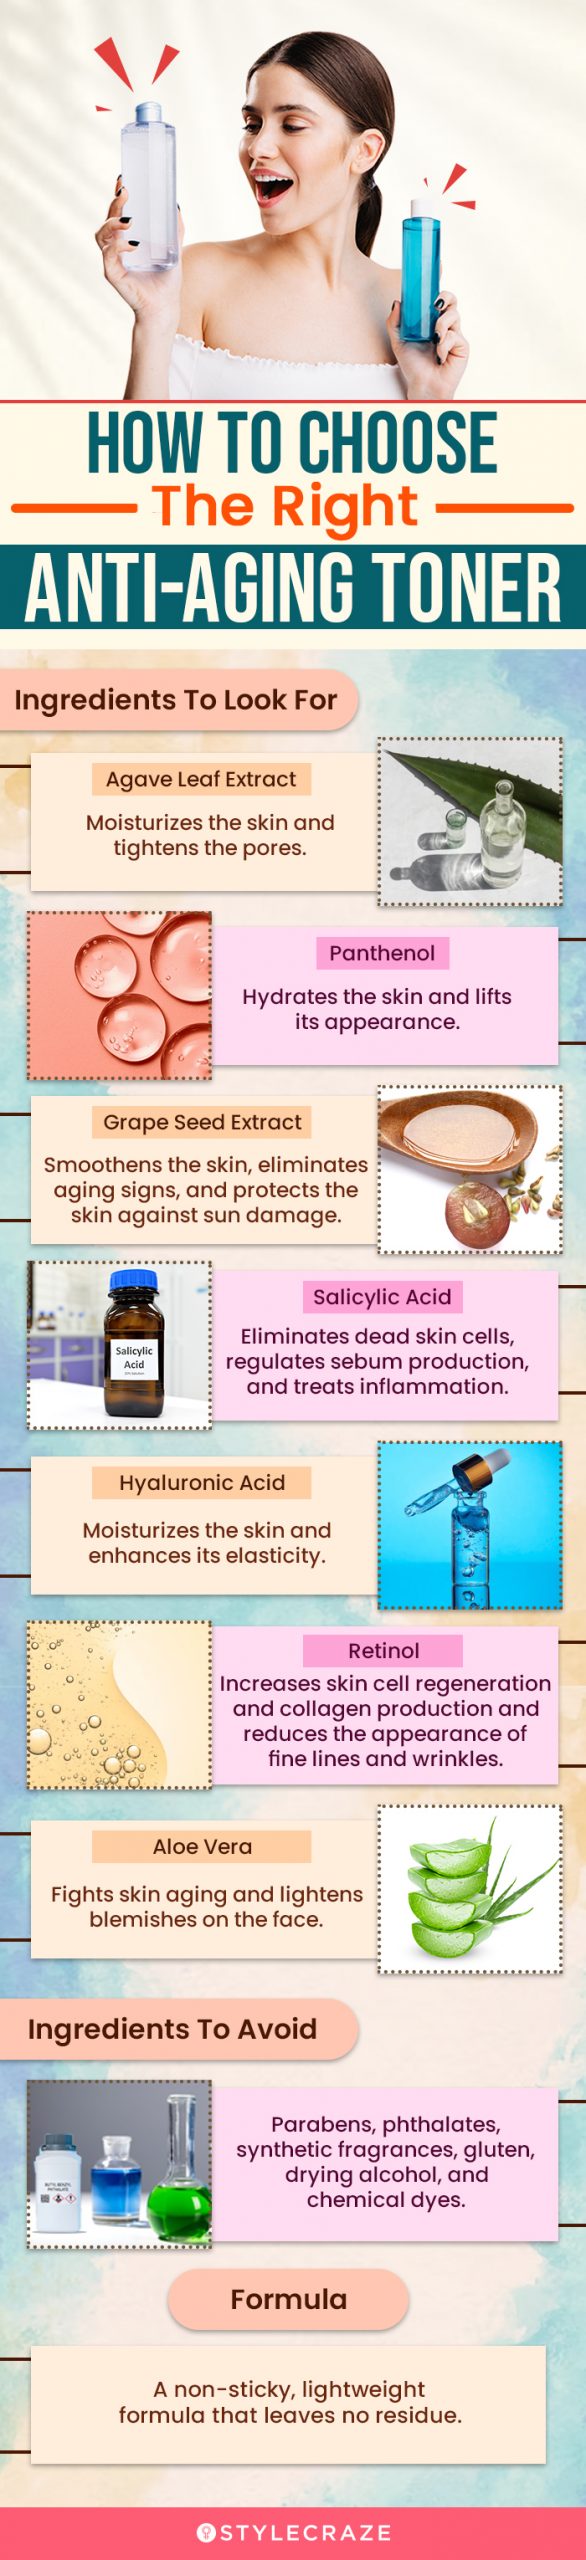 How To Choose The Right Anti-Aging Toner (infographic)